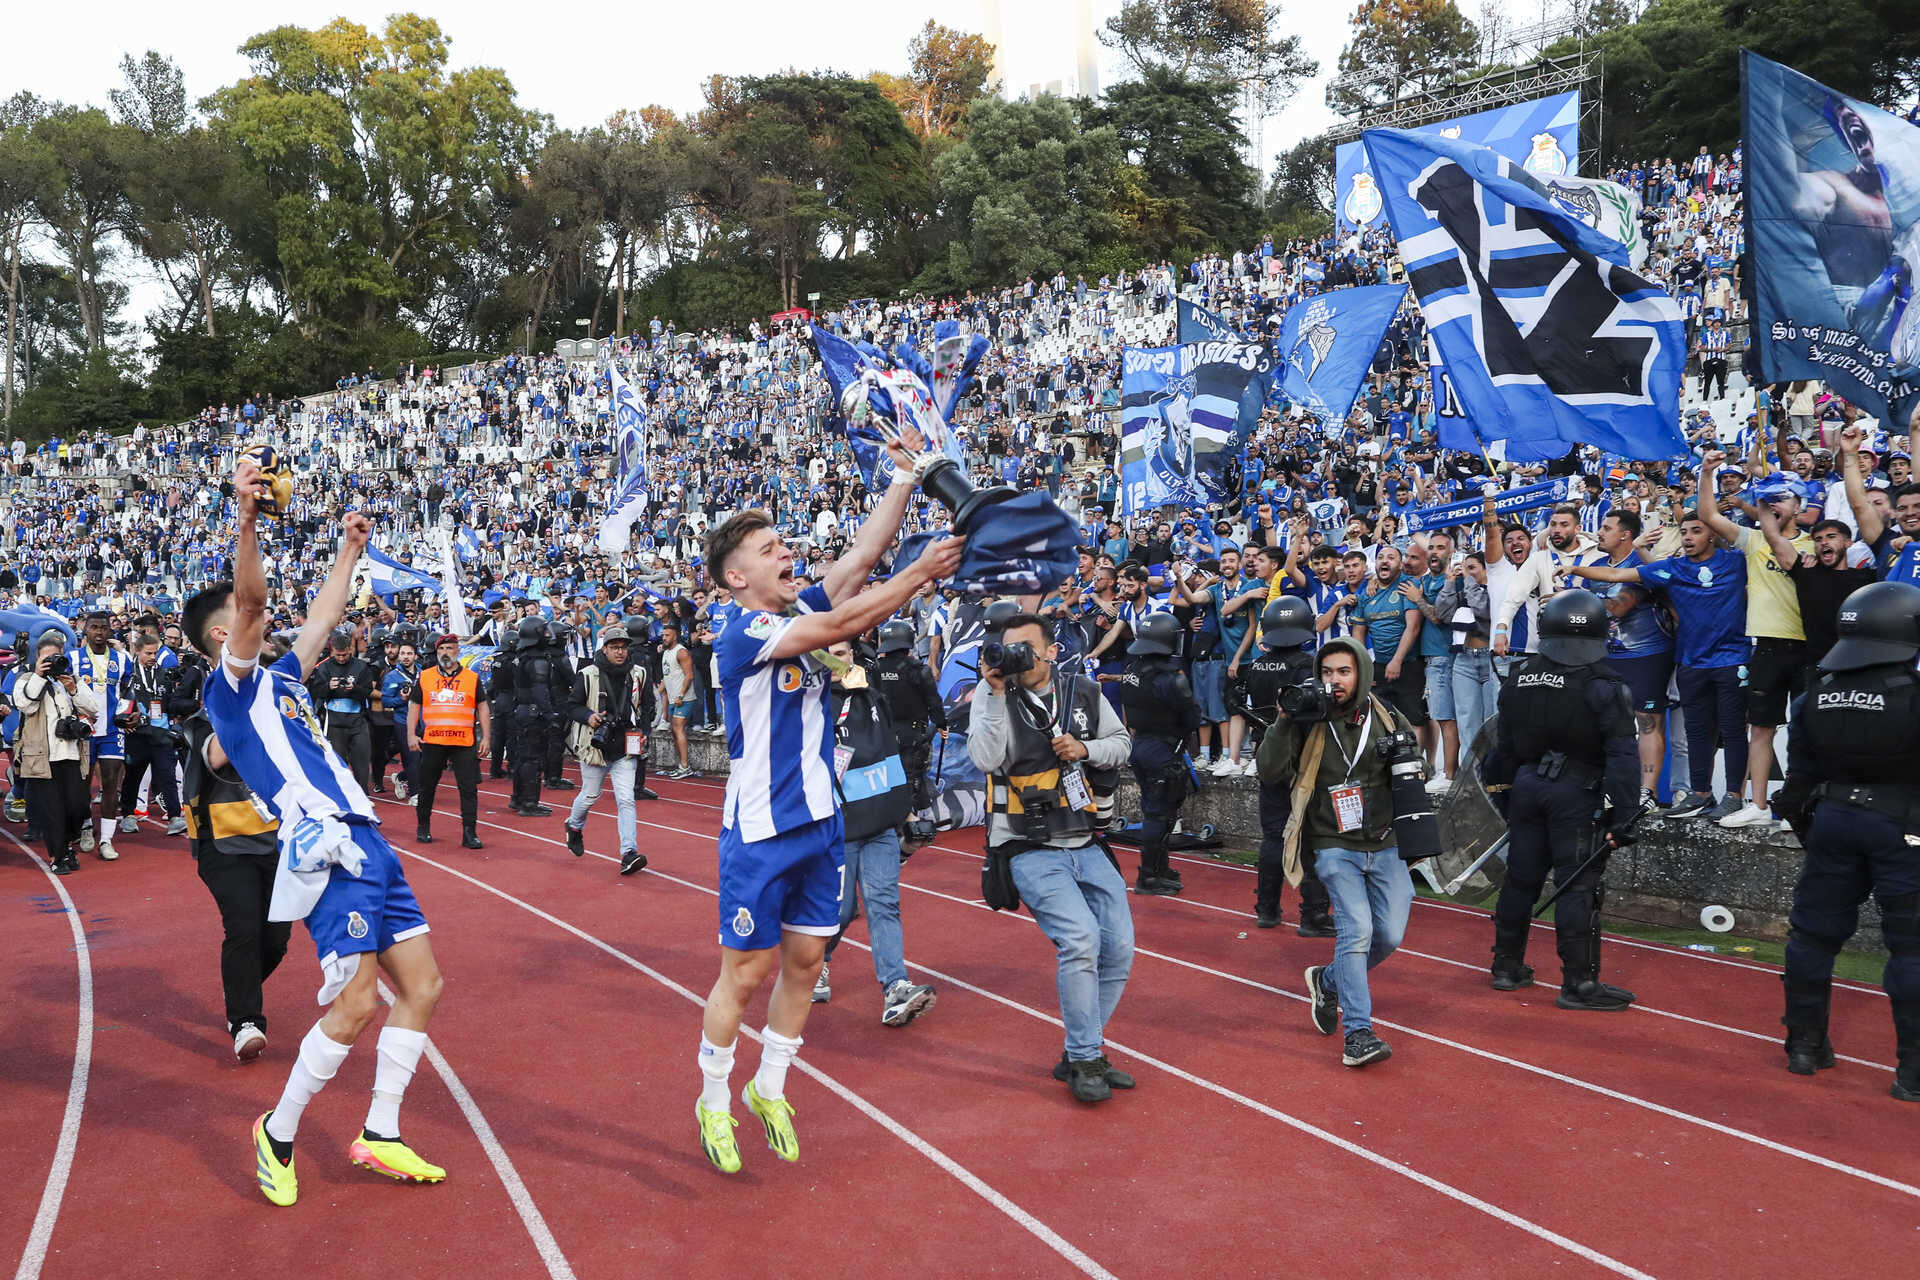 FC Porto regrets the events that occurred in the cup final and is asking the police for clarification